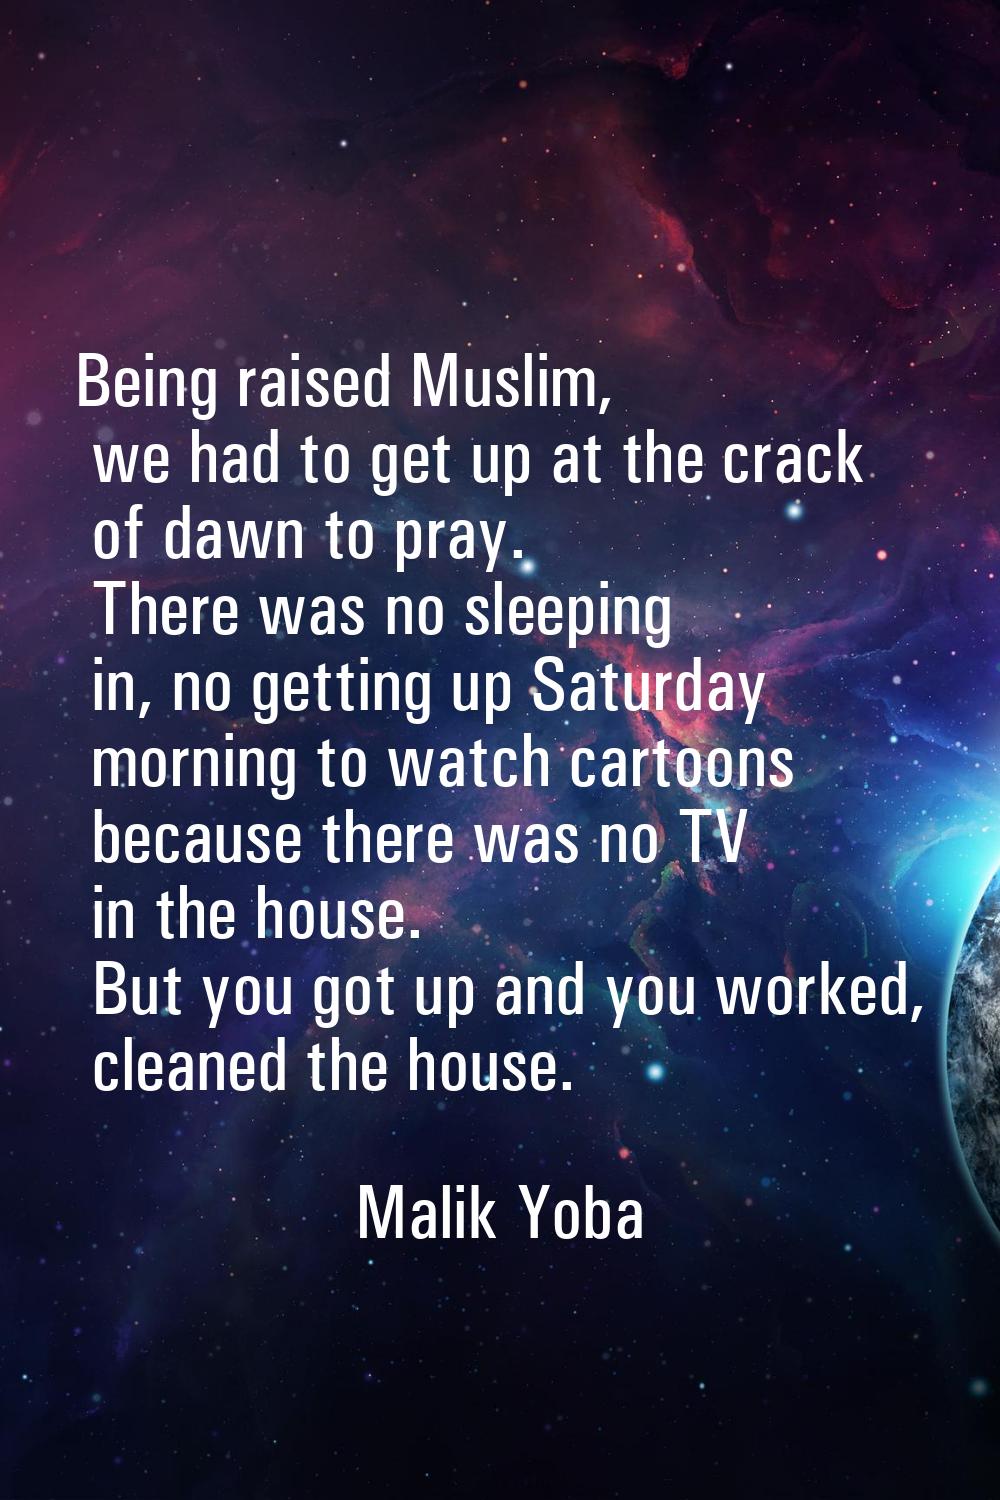 Being raised Muslim, we had to get up at the crack of dawn to pray. There was no sleeping in, no ge